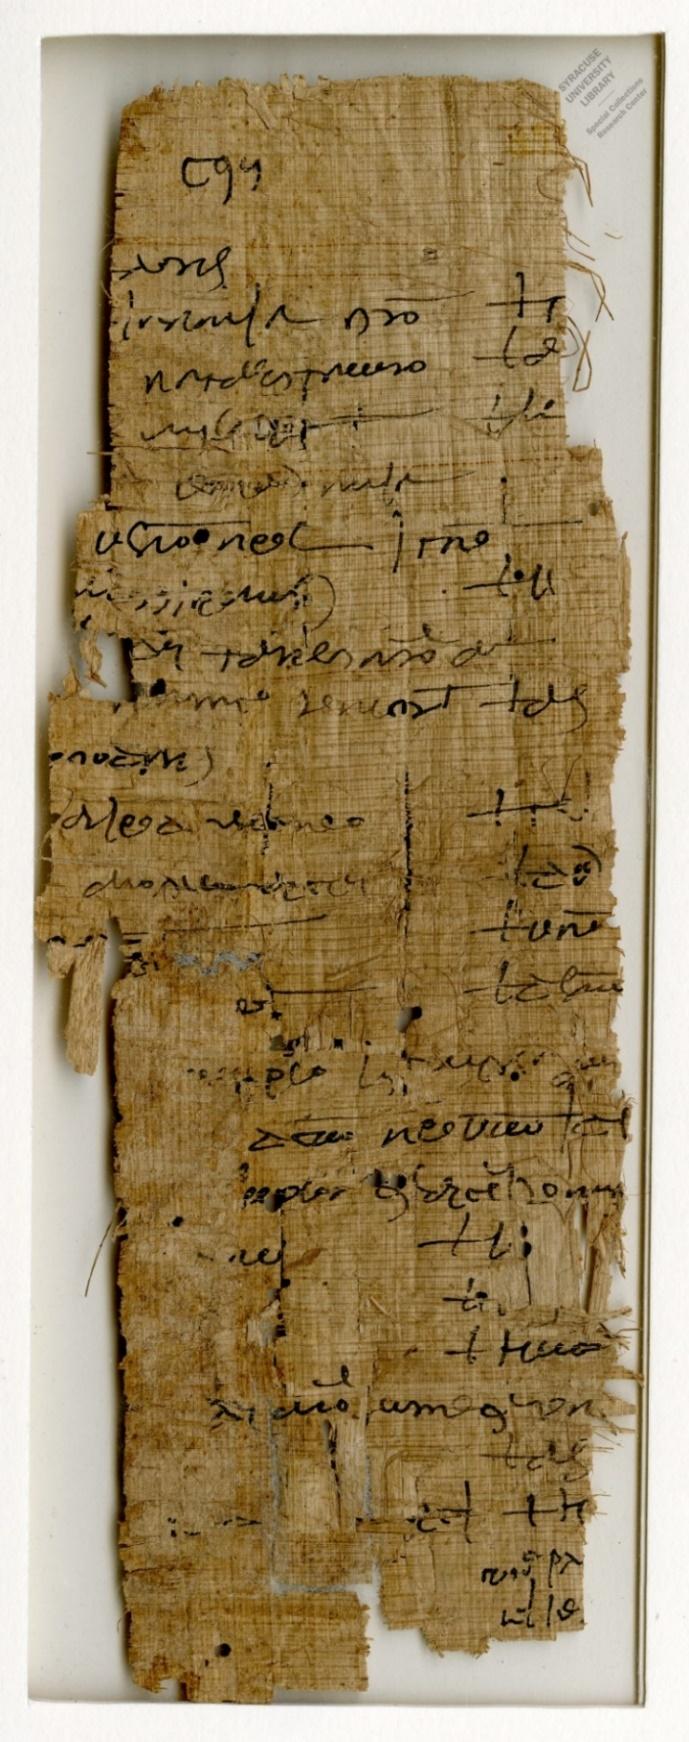 Ancient World Writing Systems Page 7 Papyrus Fragment Describing Payments Made in Wheat, sheet 298